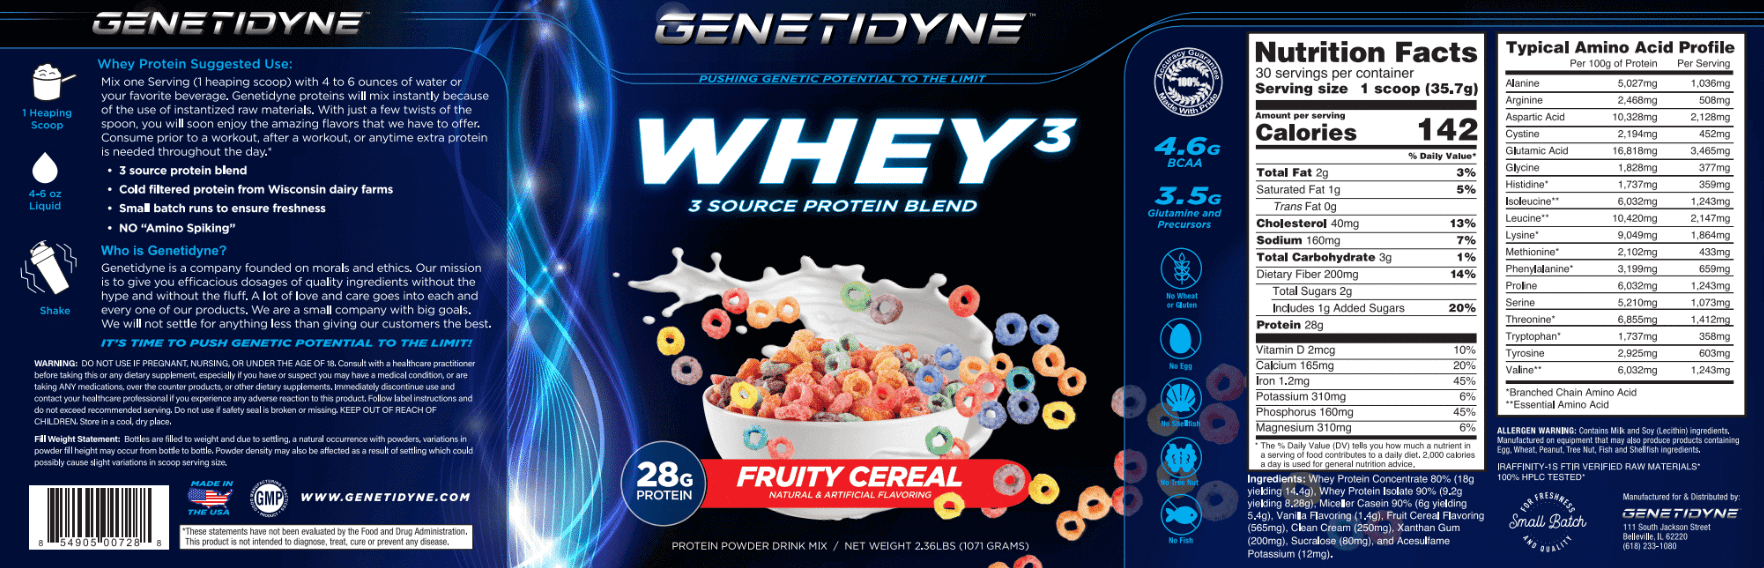 Genetidyne Whey 3 Source Protein Blend Toasty Cinnamon Cereal Flavor P